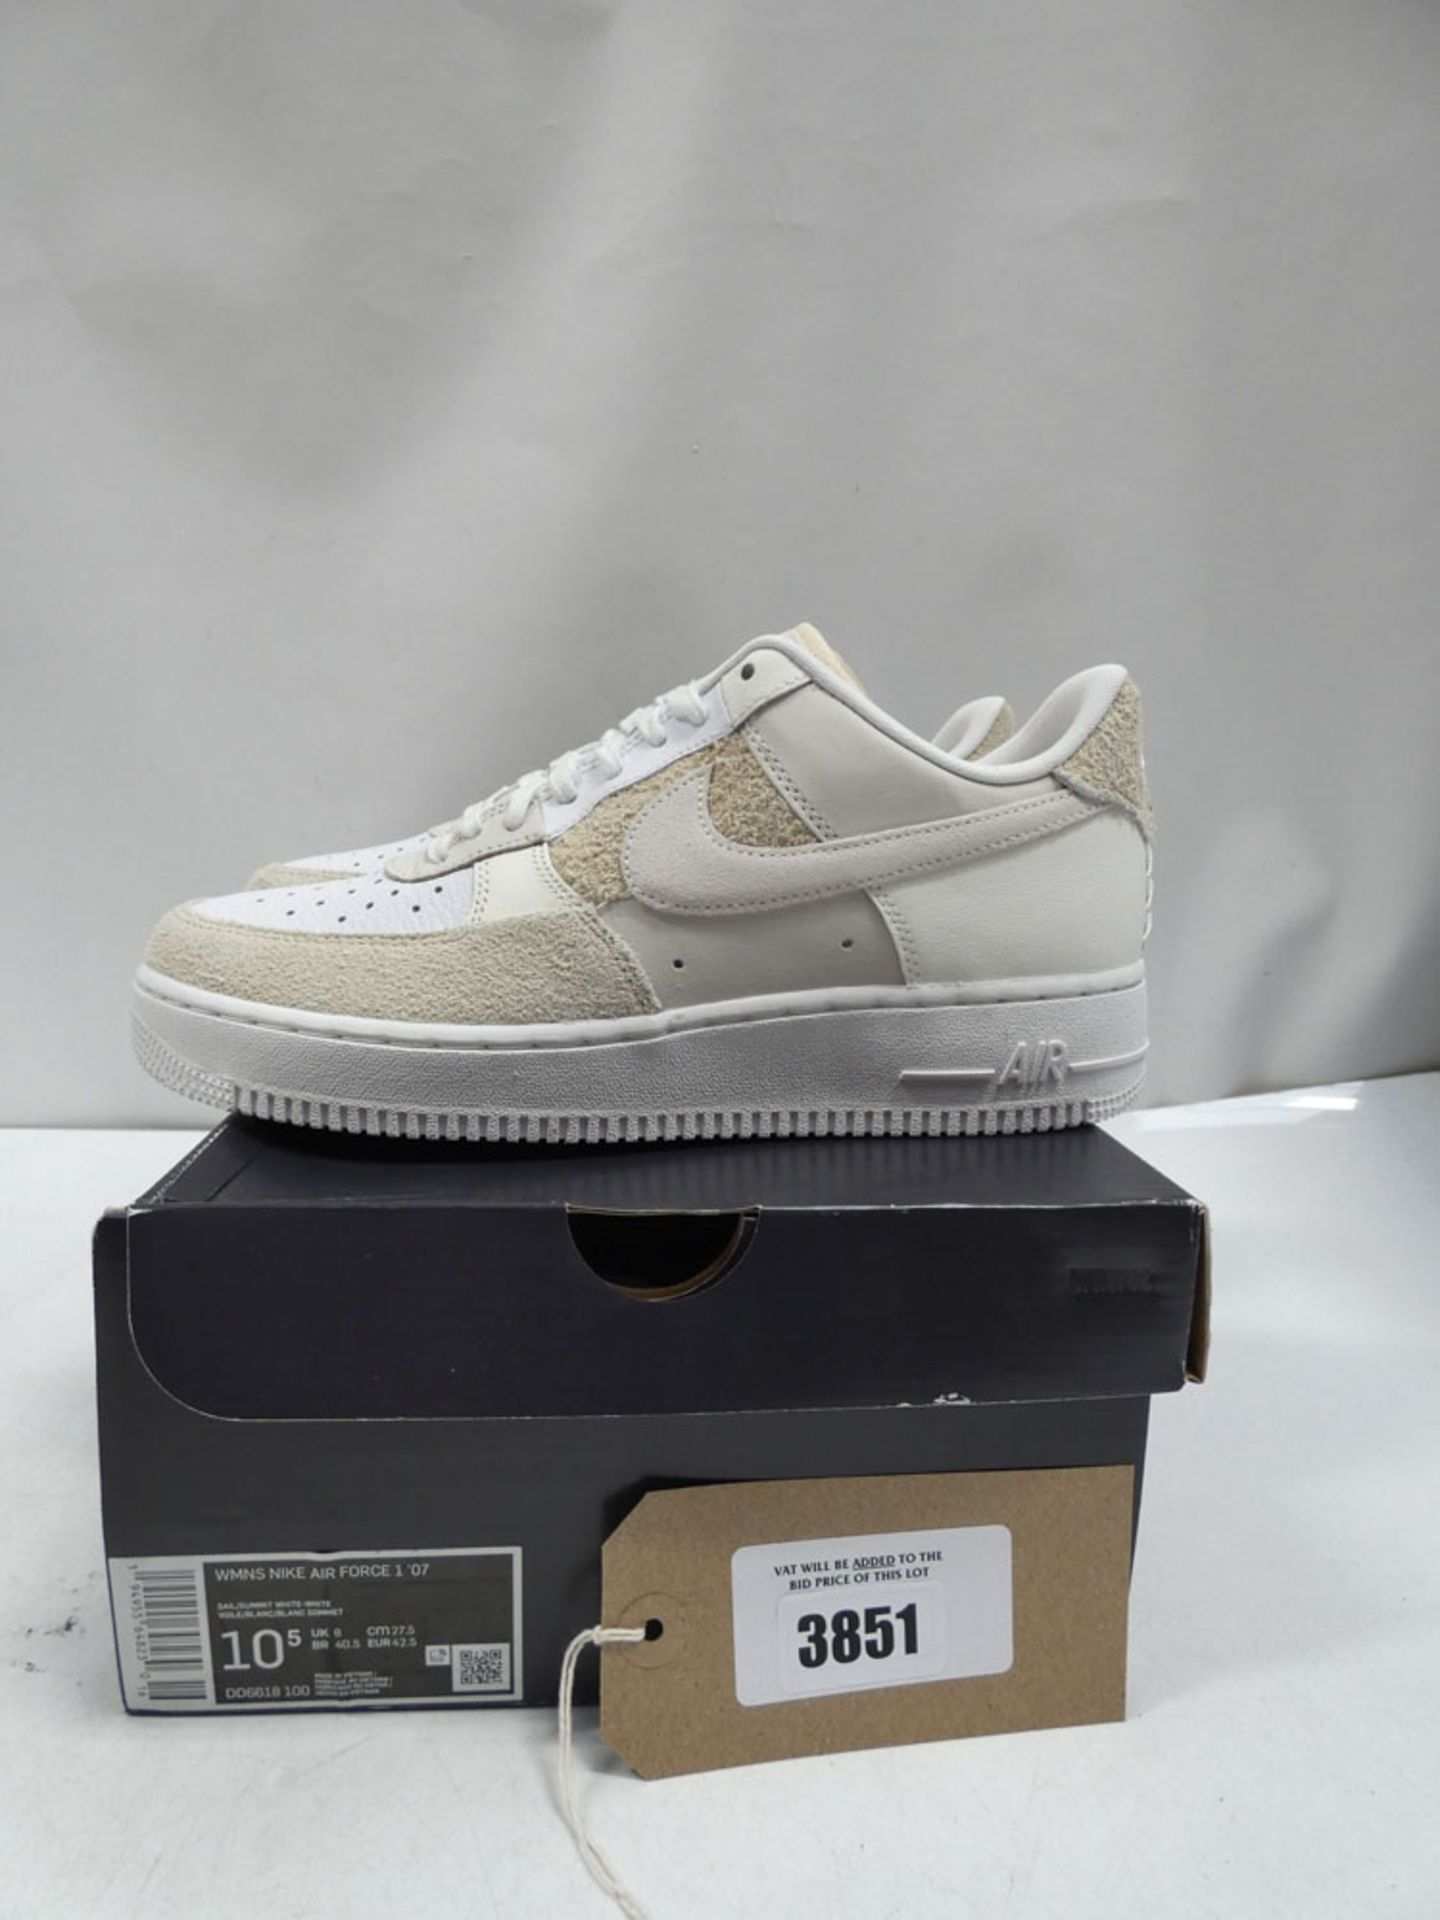 Nike Air Force 1 Low '07 Coconut Milk womens trainers size 8